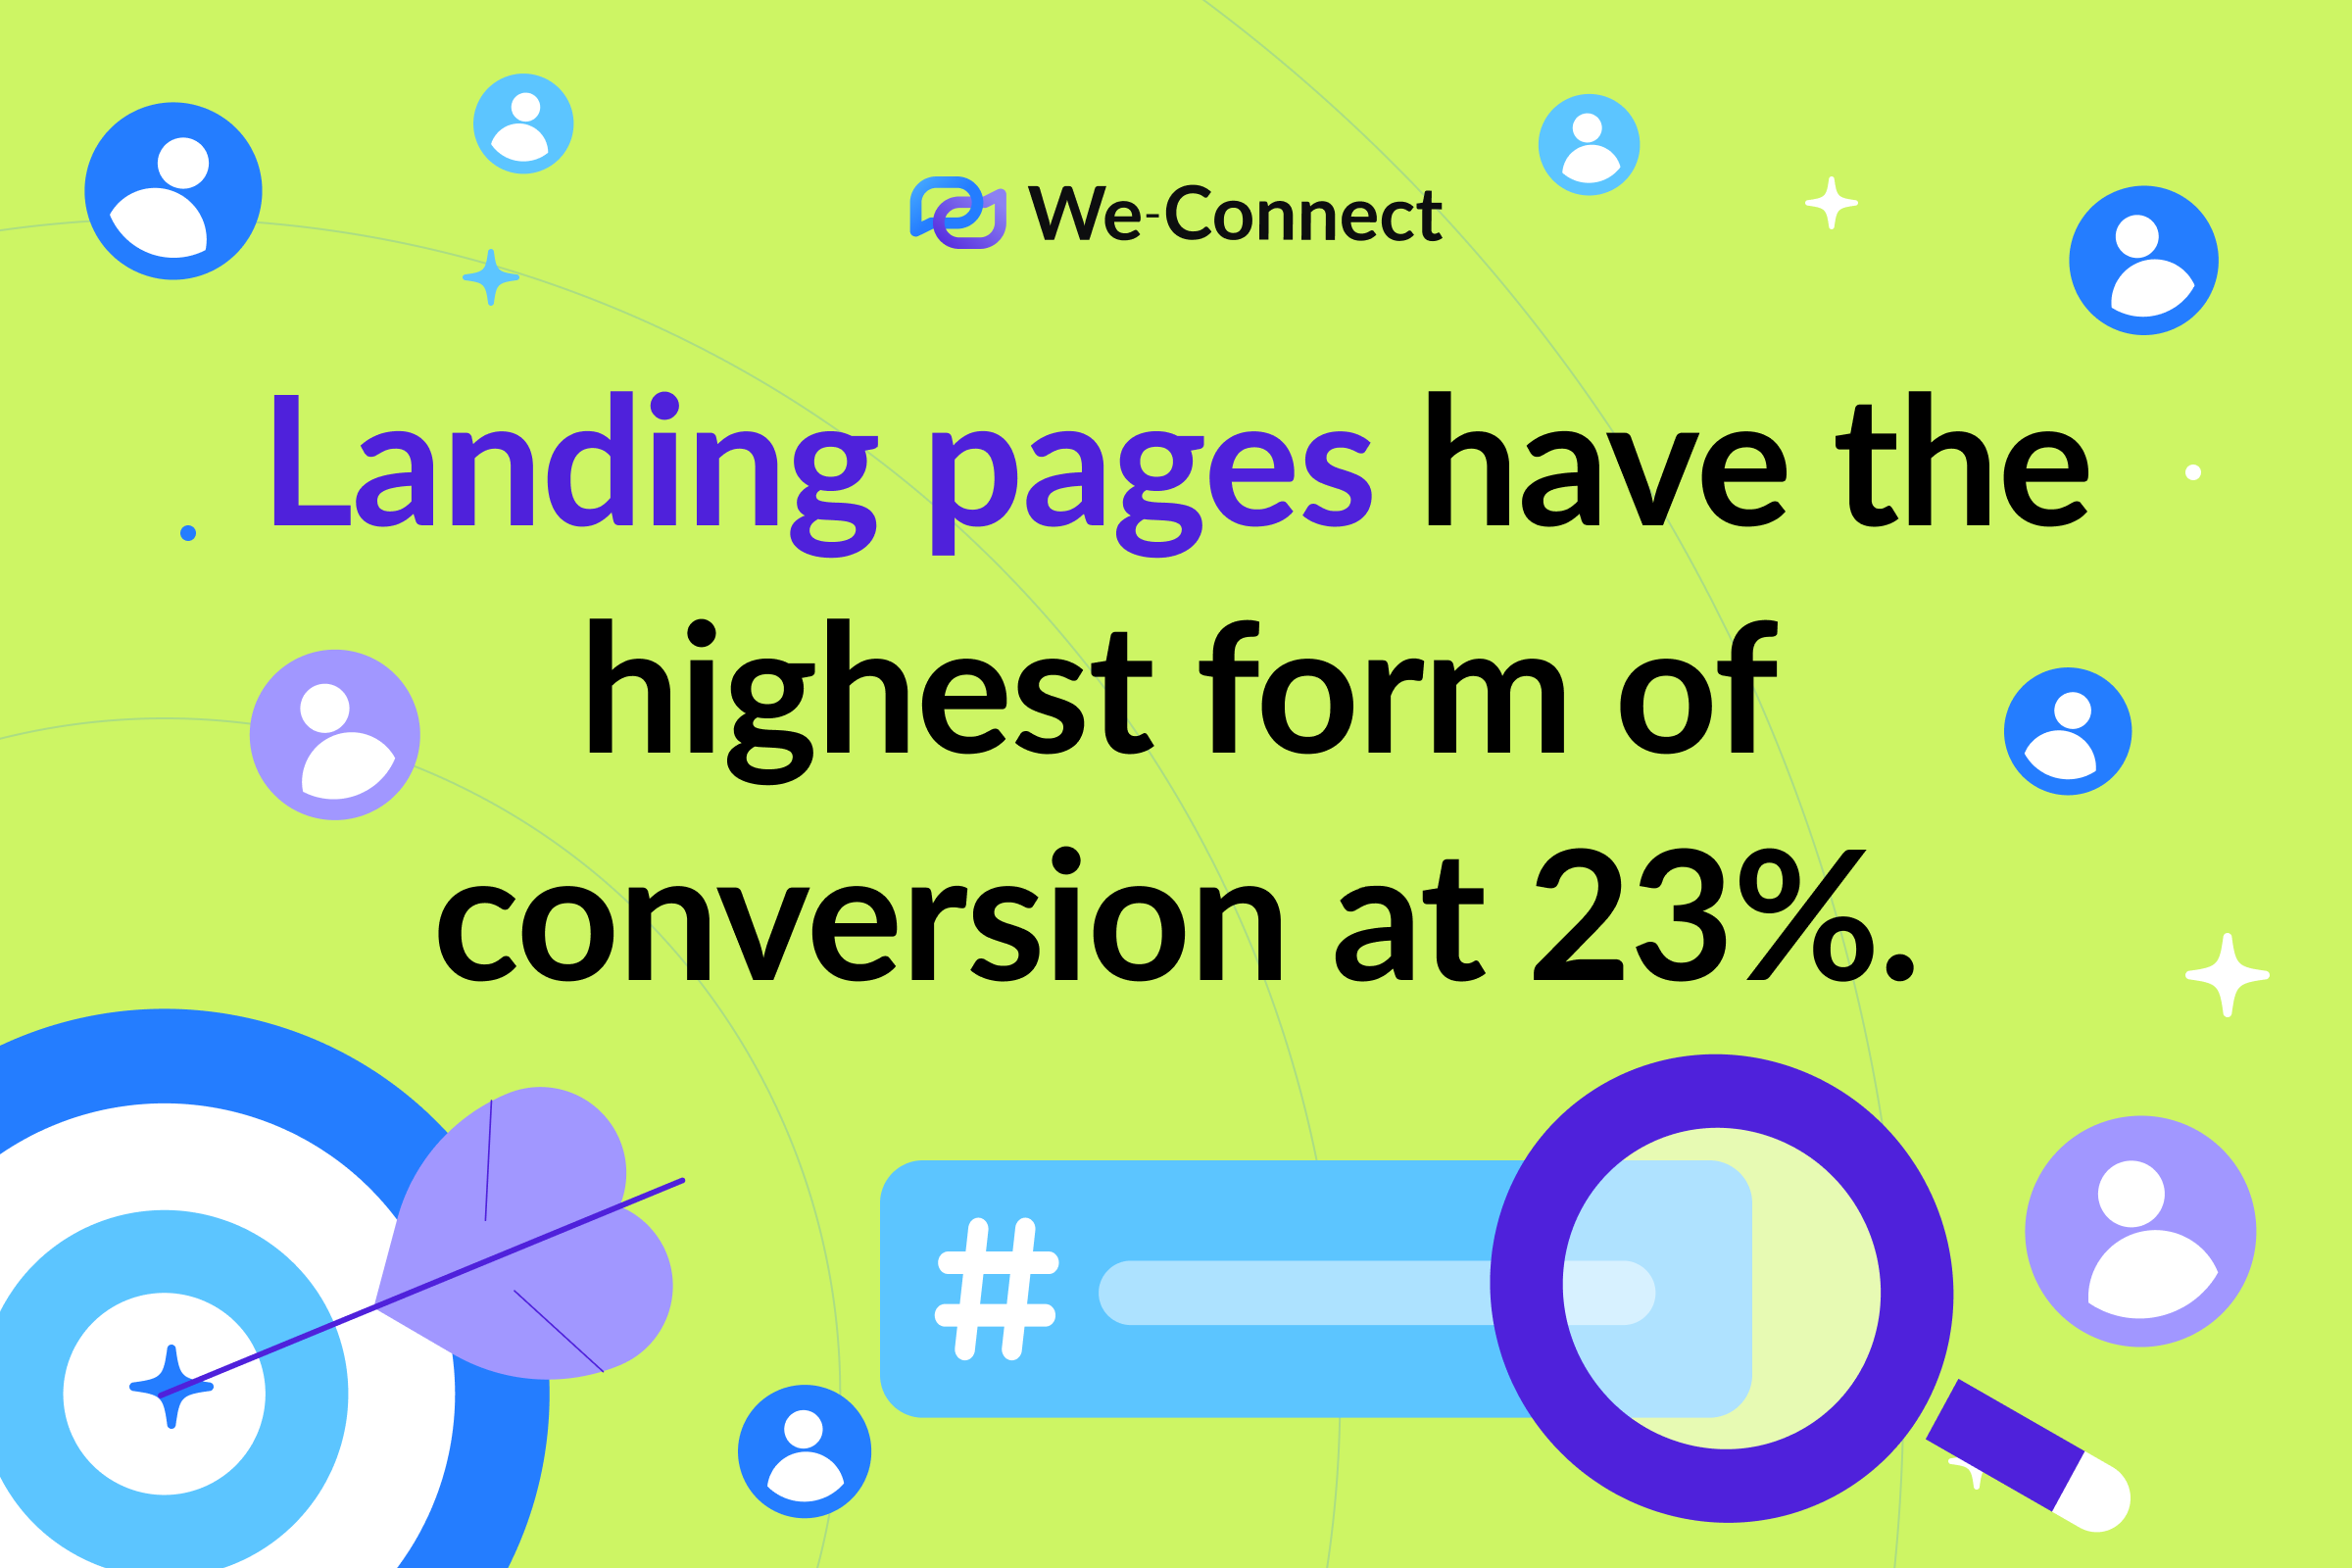 Landing pages have the highest form of conversion at 23%